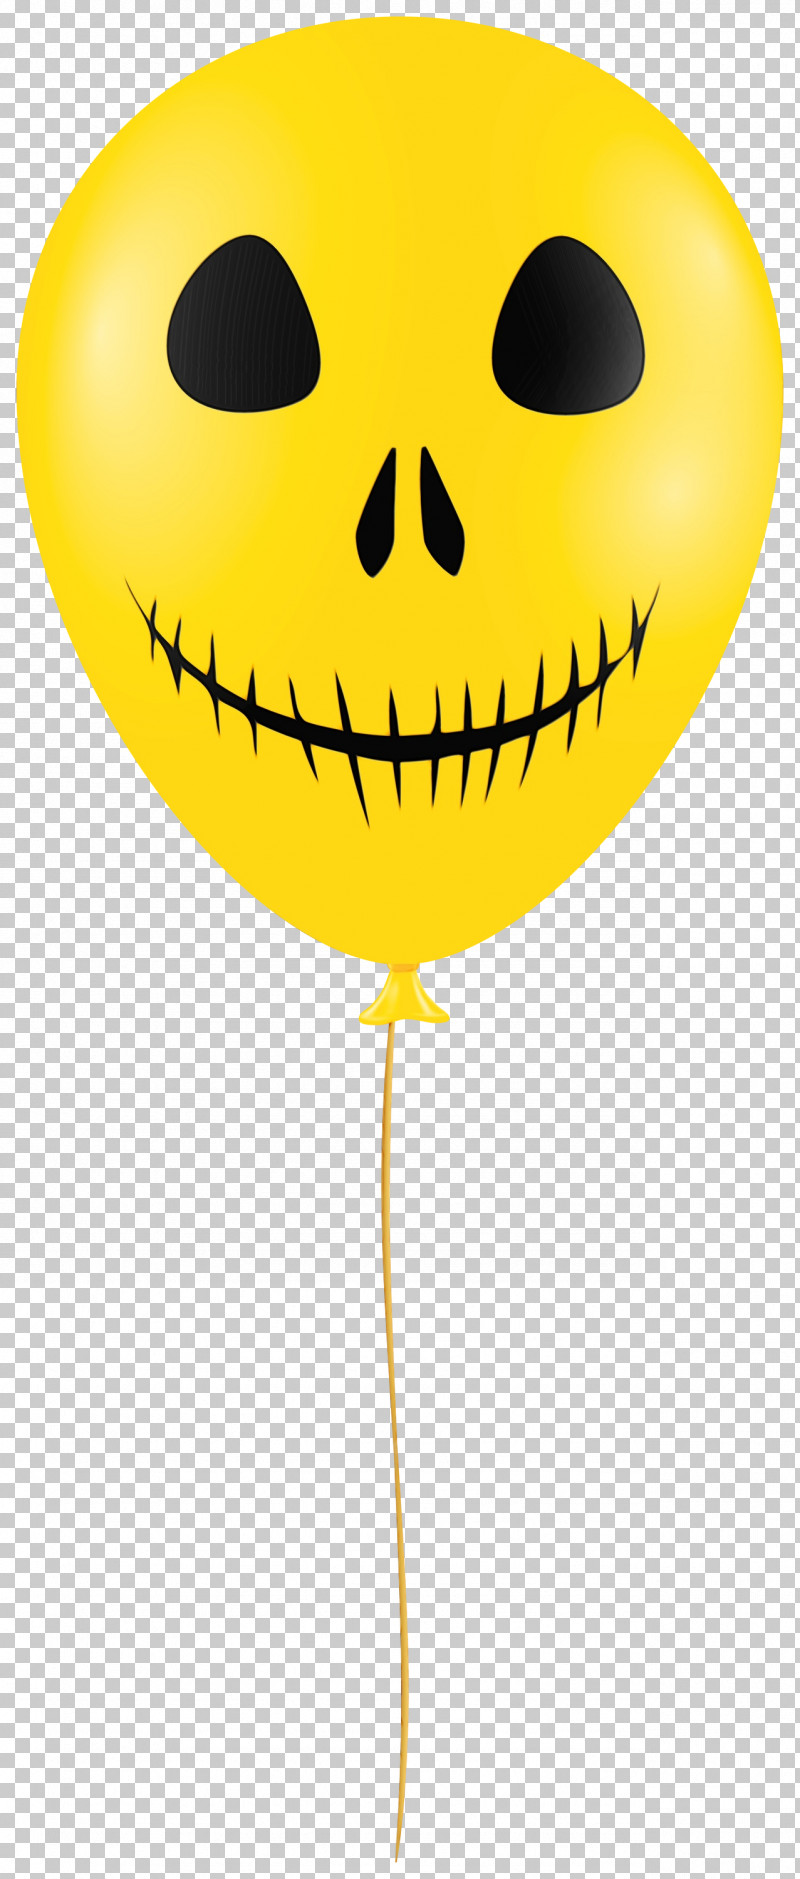 Balloon Halloween Balloon (5 Pieces) J&s Costume Birthday Silhouette PNG, Clipart, Balloon, Birthday, Costume, Line Art, Paint Free PNG Download